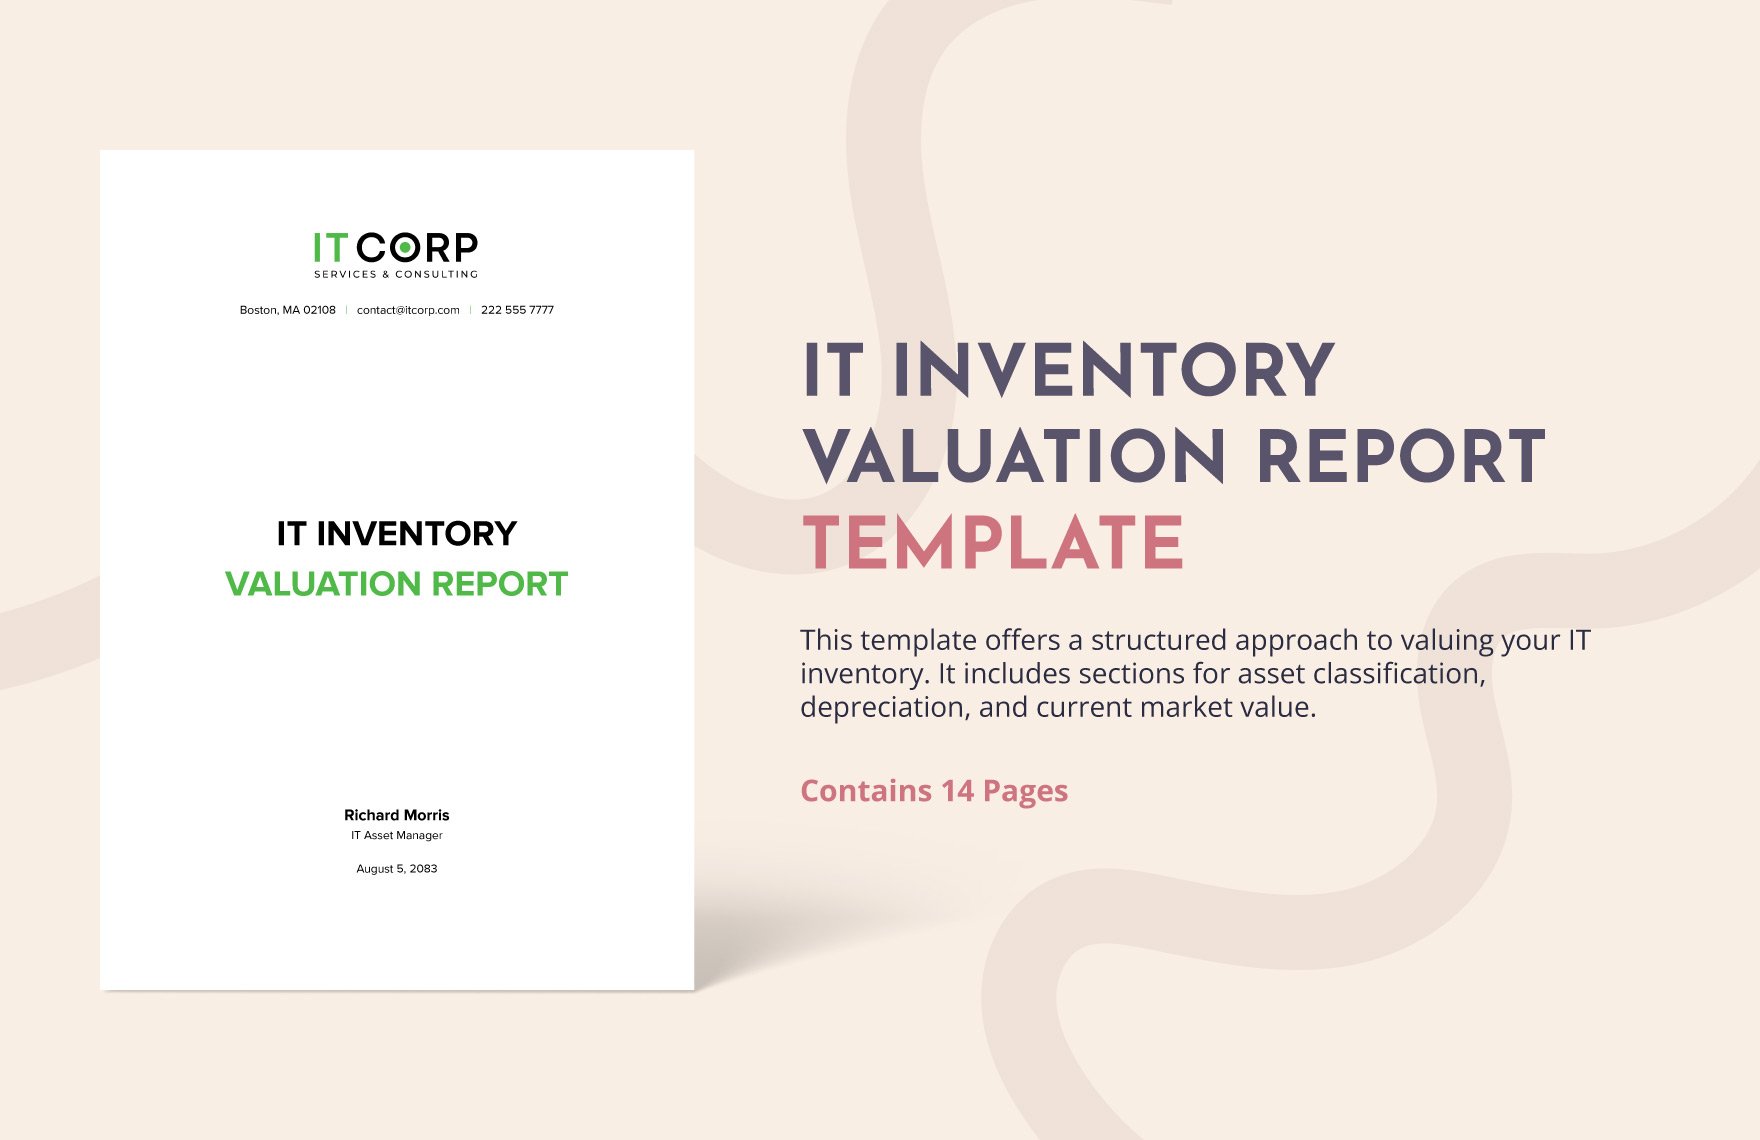 IT Inventory Valuation Report Template